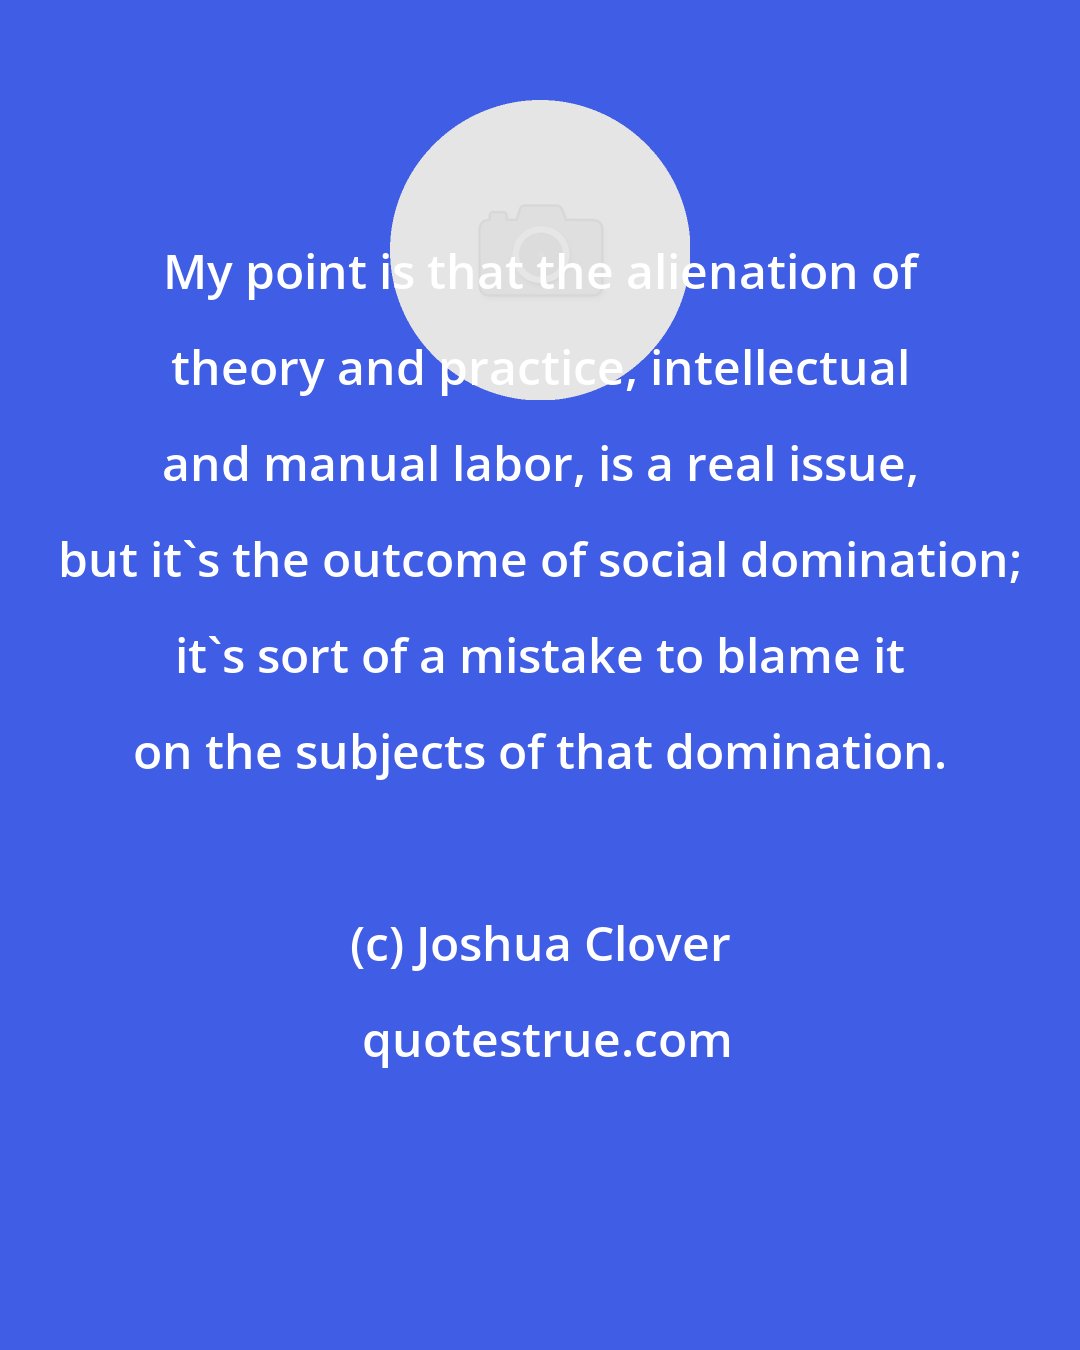 Joshua Clover: My point is that the alienation of theory and practice, intellectual and manual labor, is a real issue, but it's the outcome of social domination; it's sort of a mistake to blame it on the subjects of that domination.